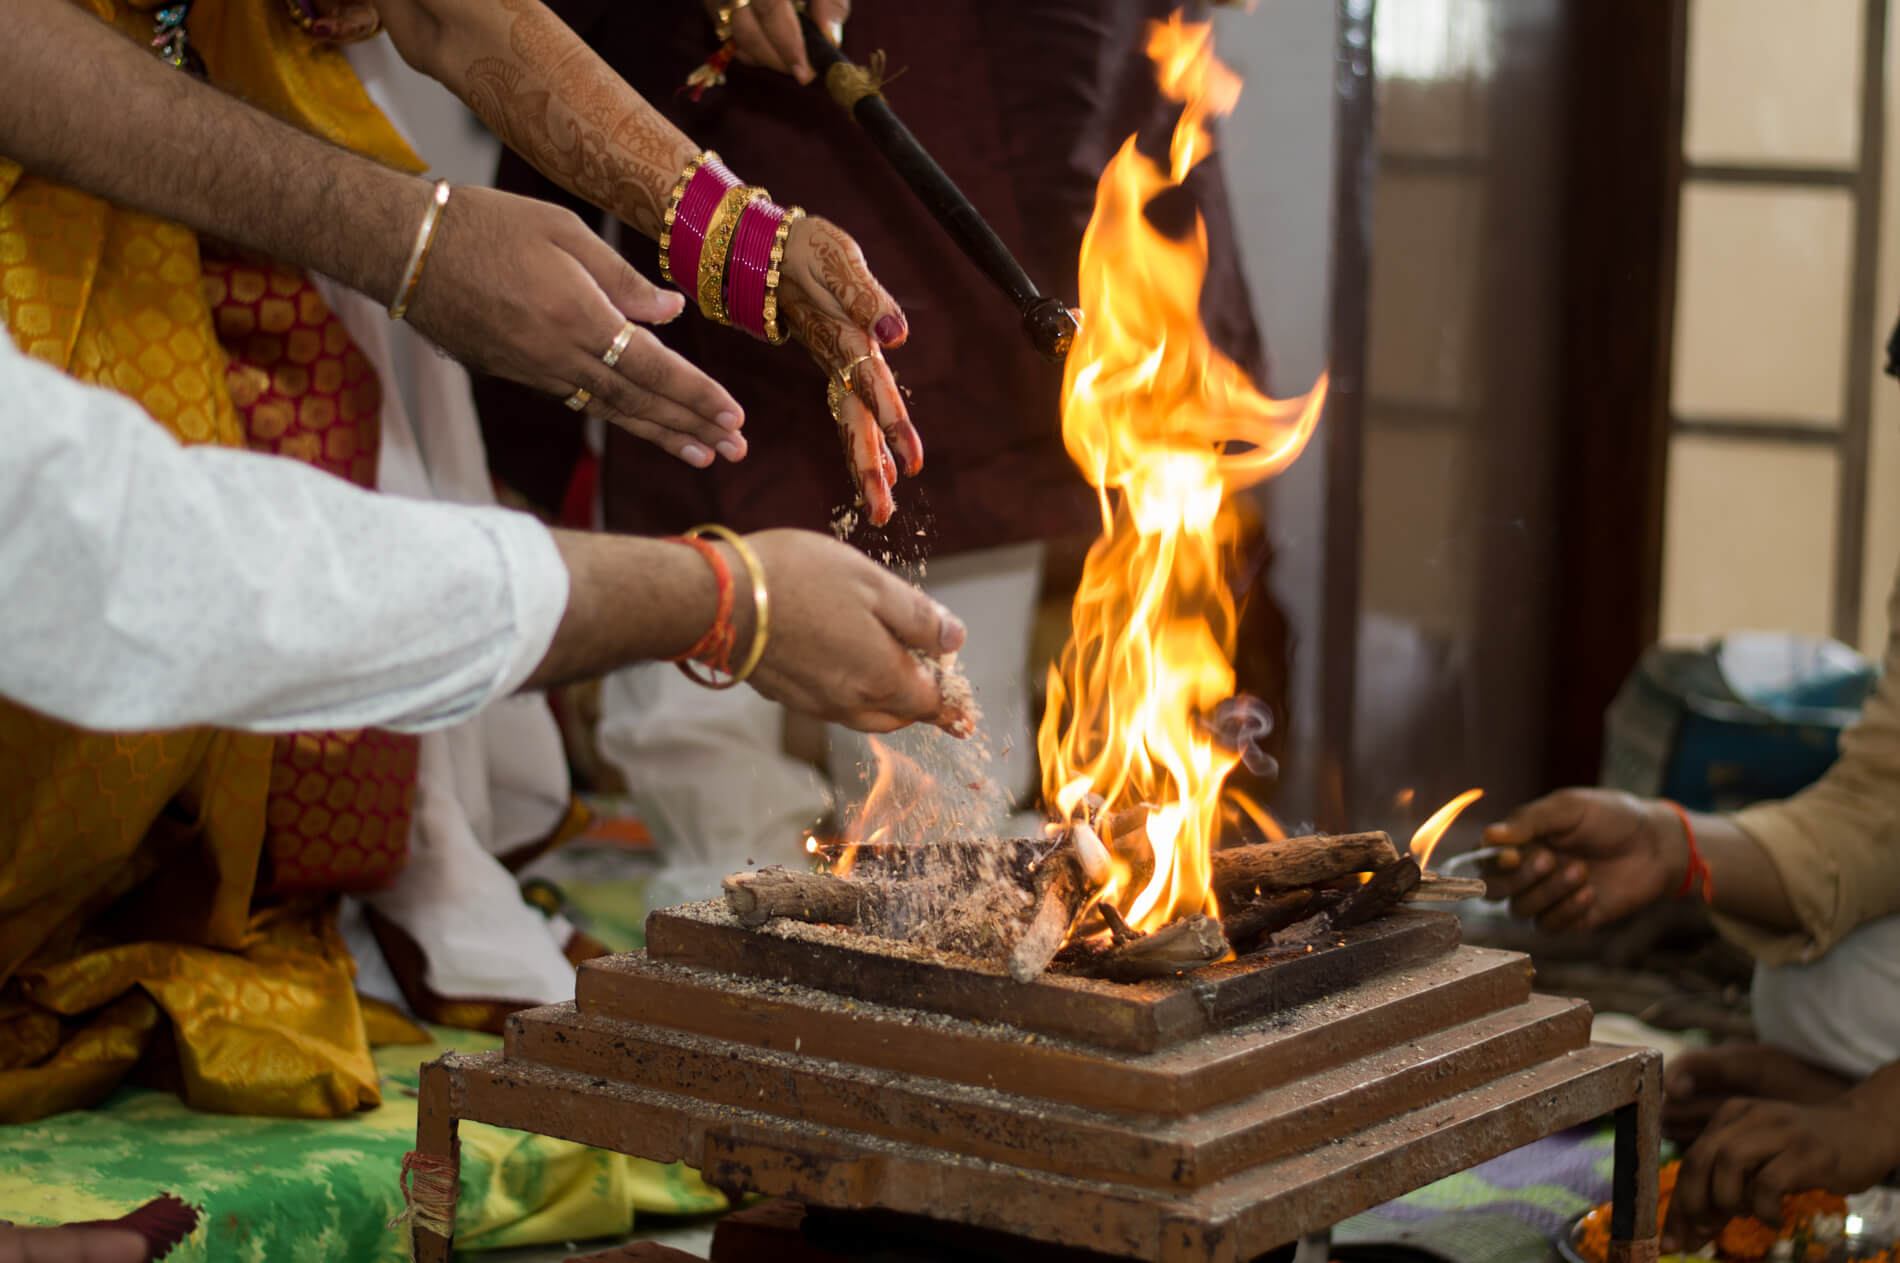 Introduction to the Vedic Ritual